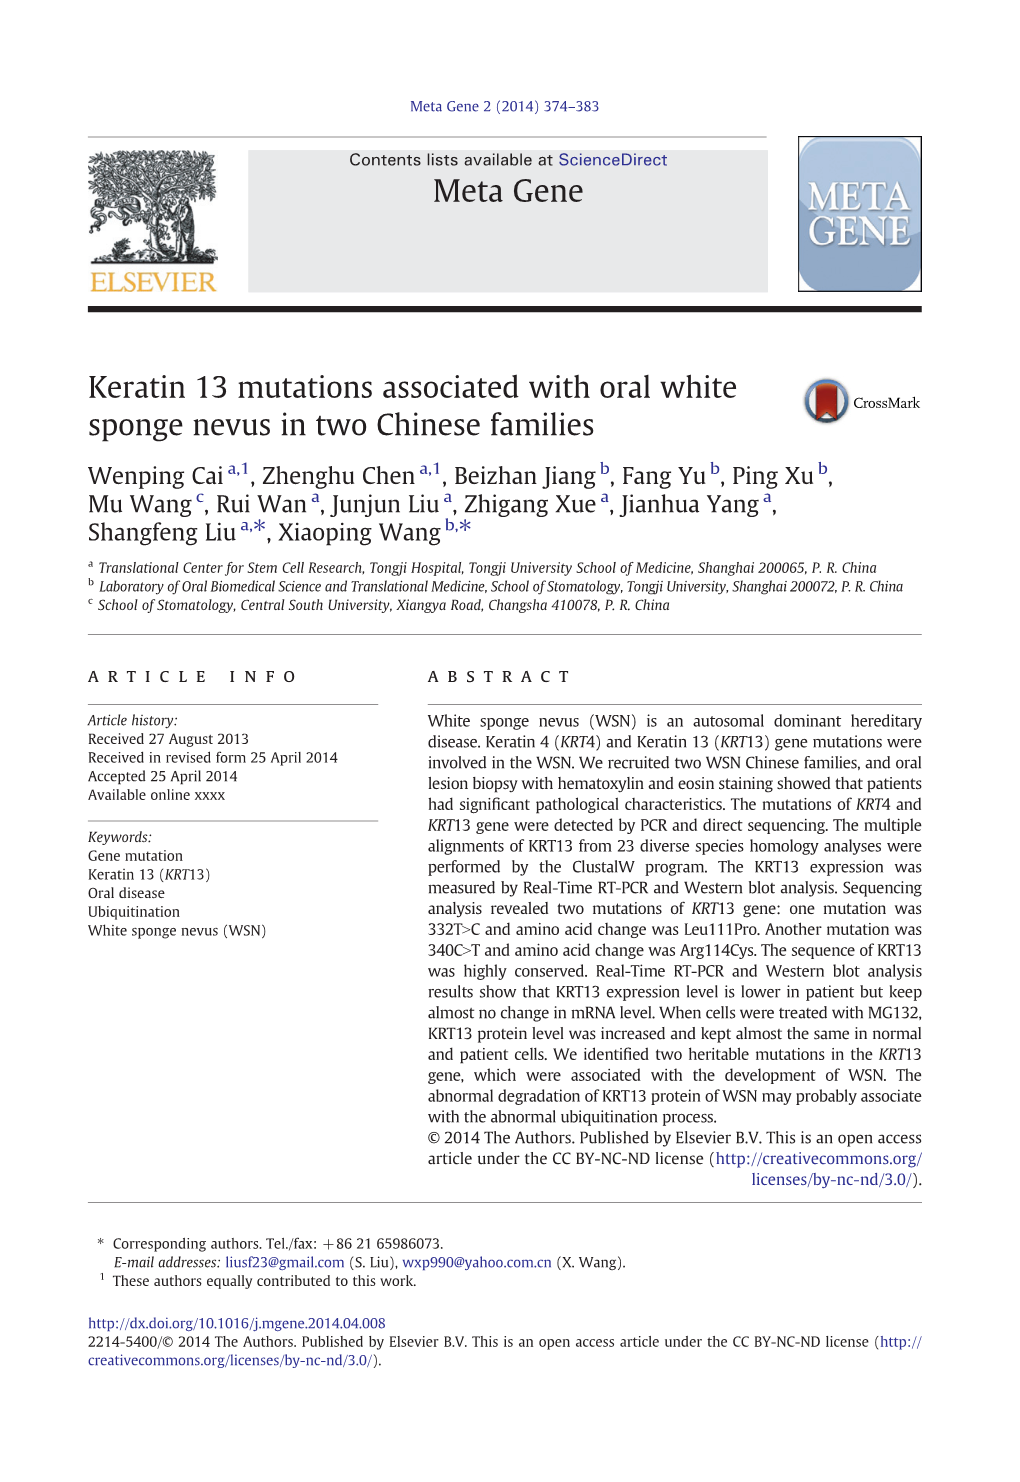 Keratin 13 Mutations Associated with Oral White Sponge Nevus in Two Chinese Families